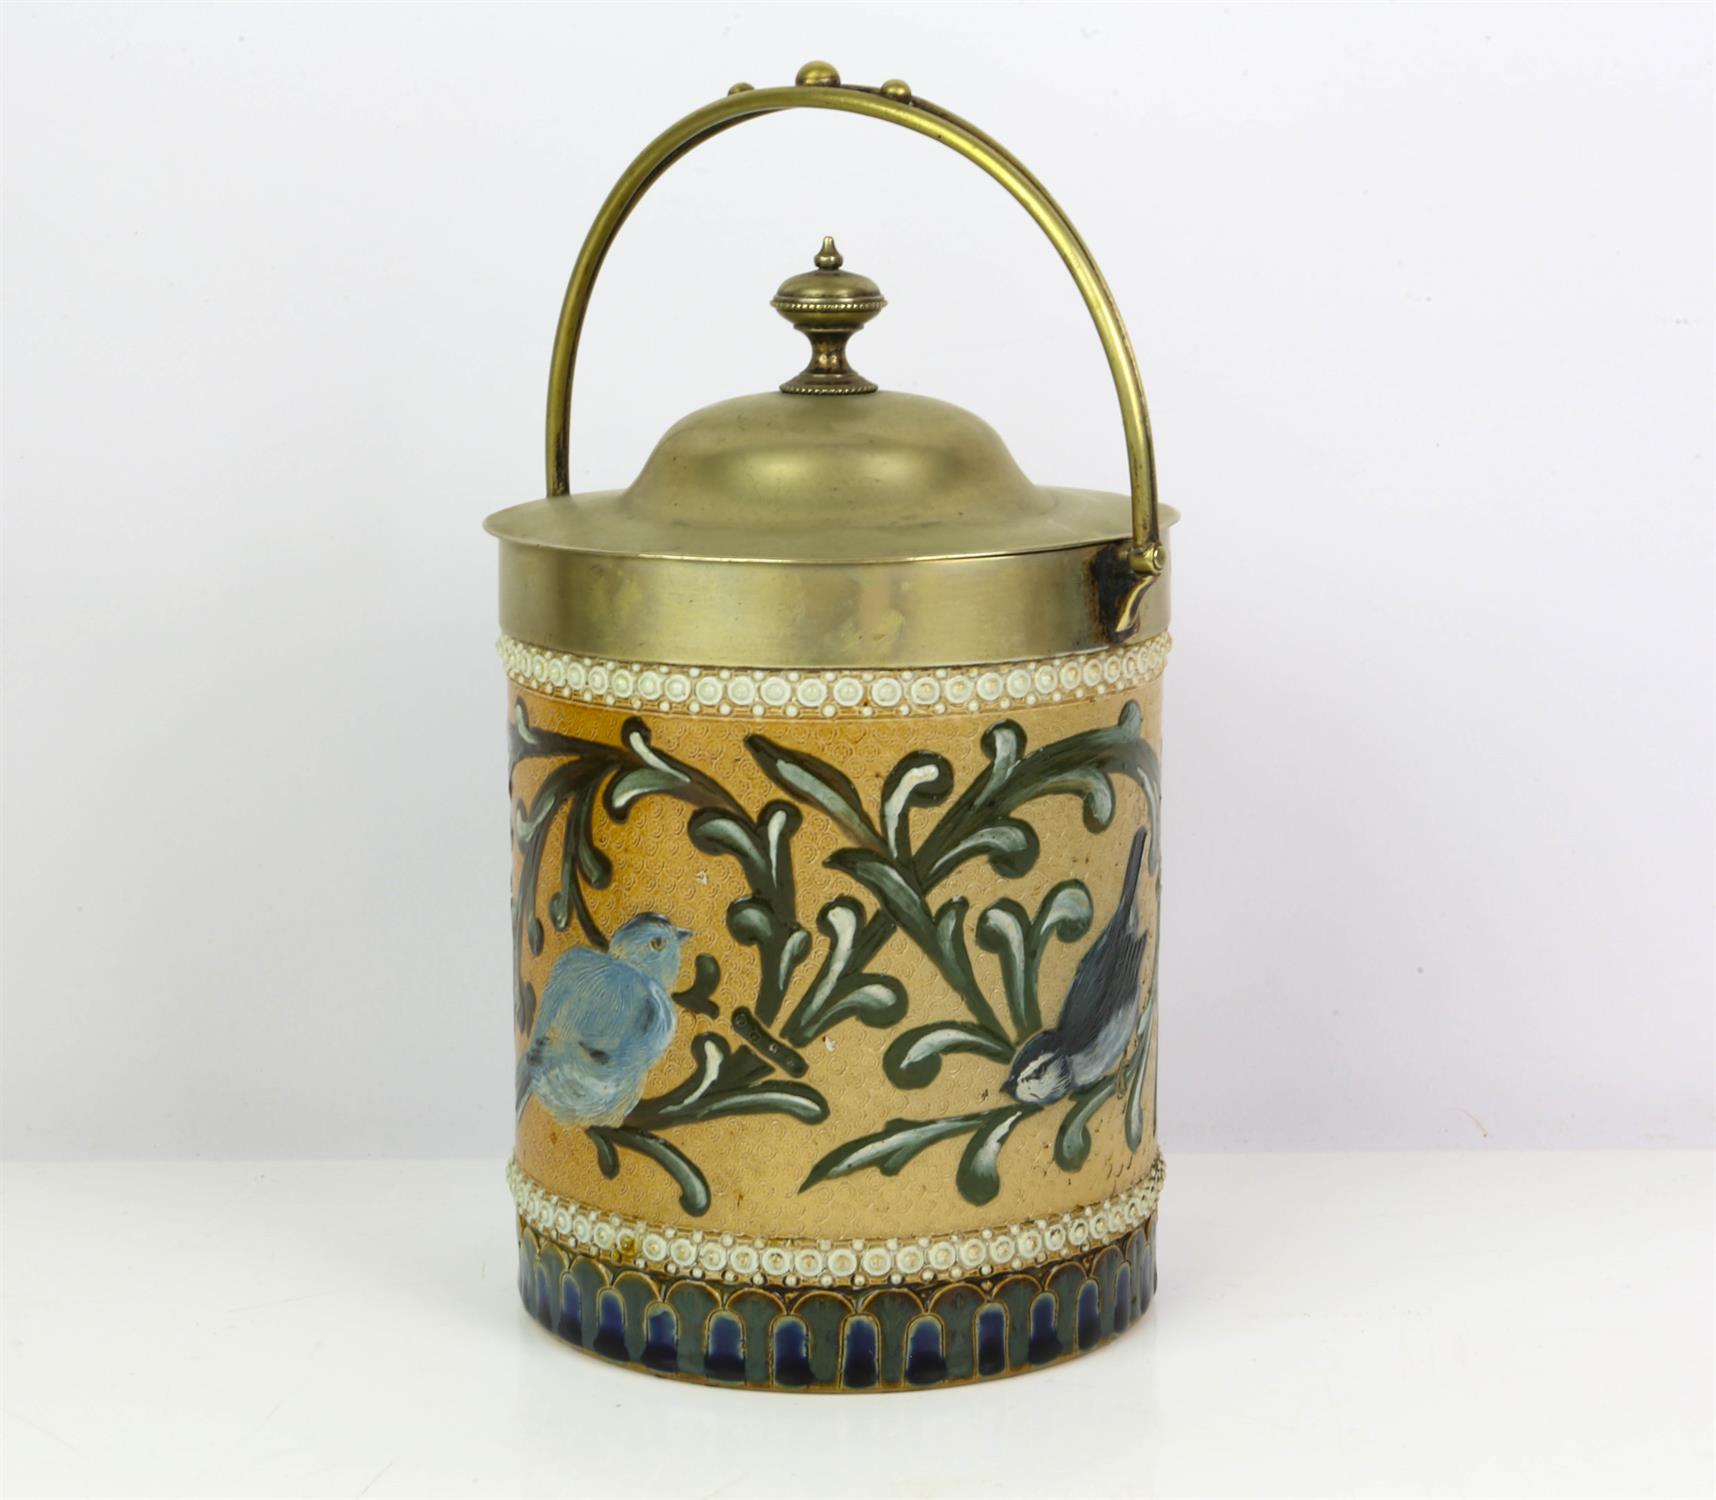 FLORENCE BARLOW (British, flor. 1873) FOR DOULTON, a stoneware biscuit barrel, mounted with a metal